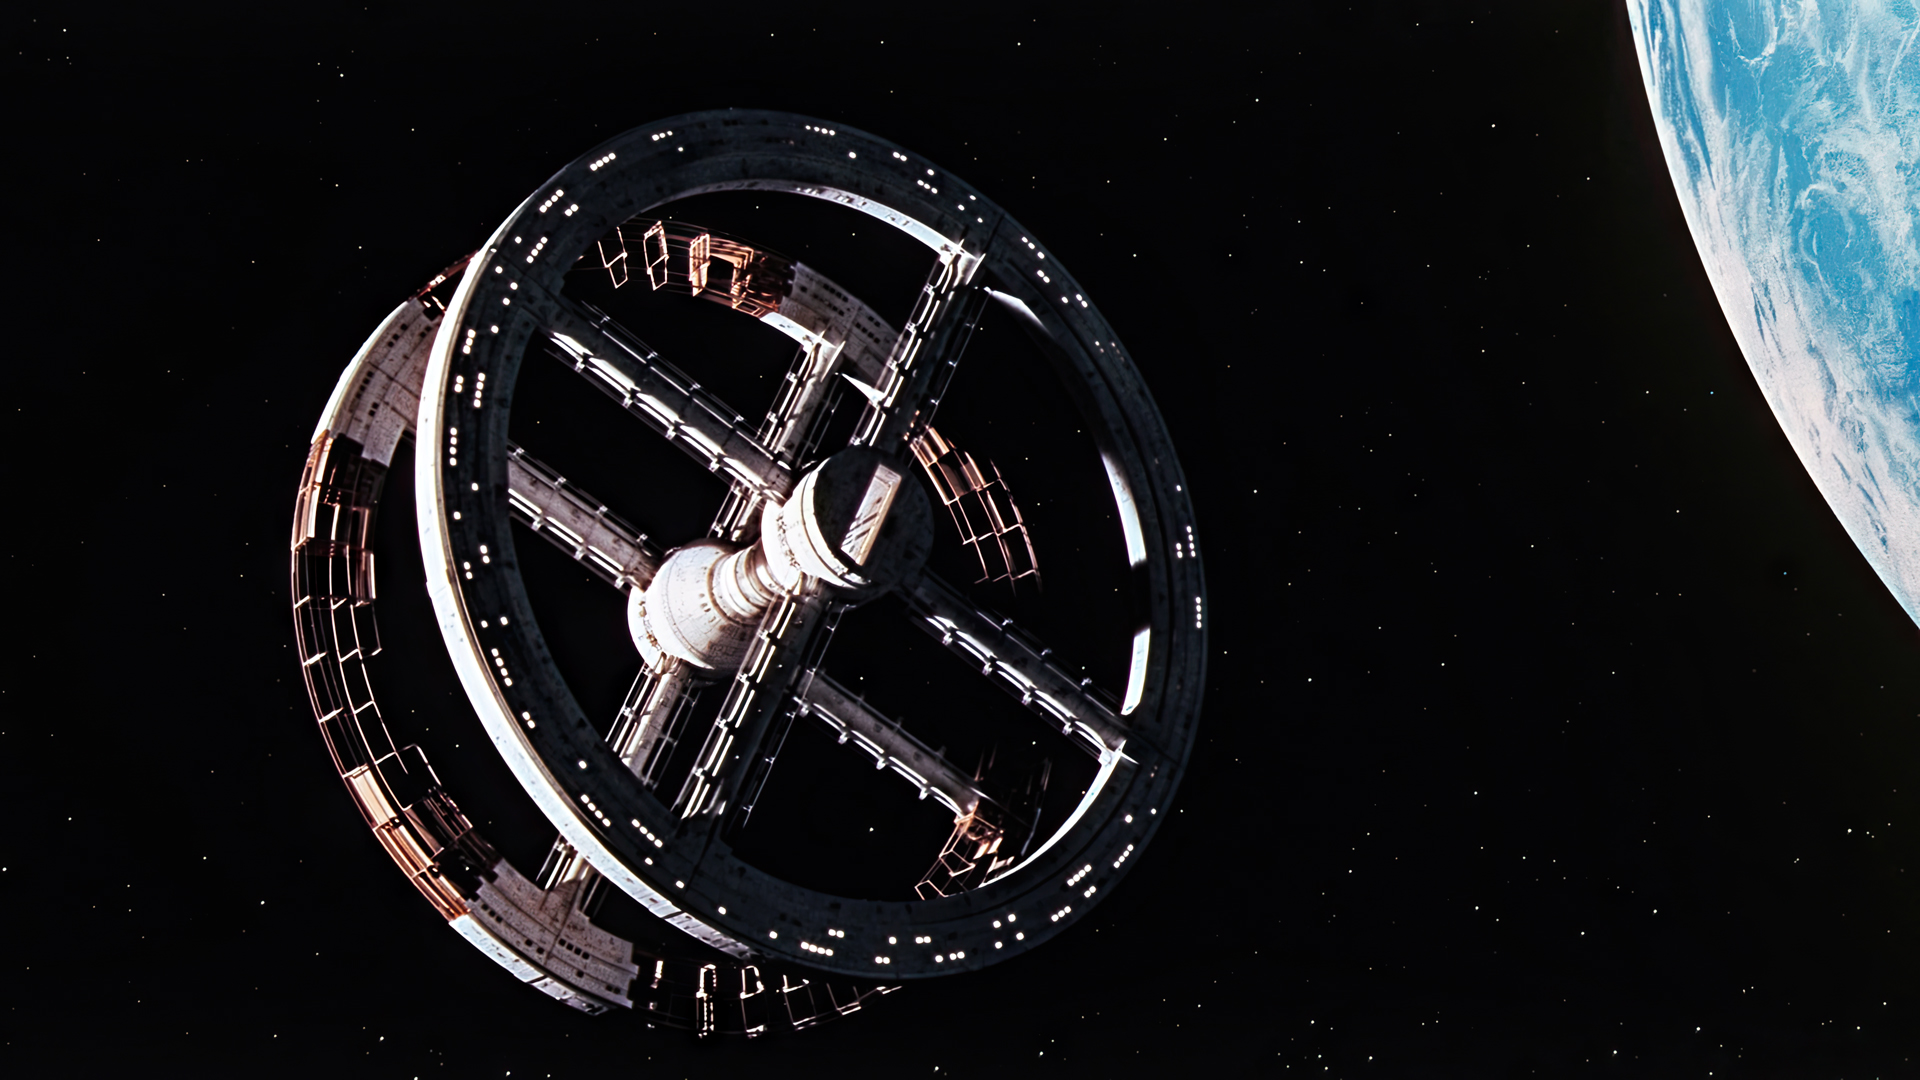 2001 A Space Odyssey Space Station V Movies Film Stills Spaceship Planet Stars Space 1920x1080